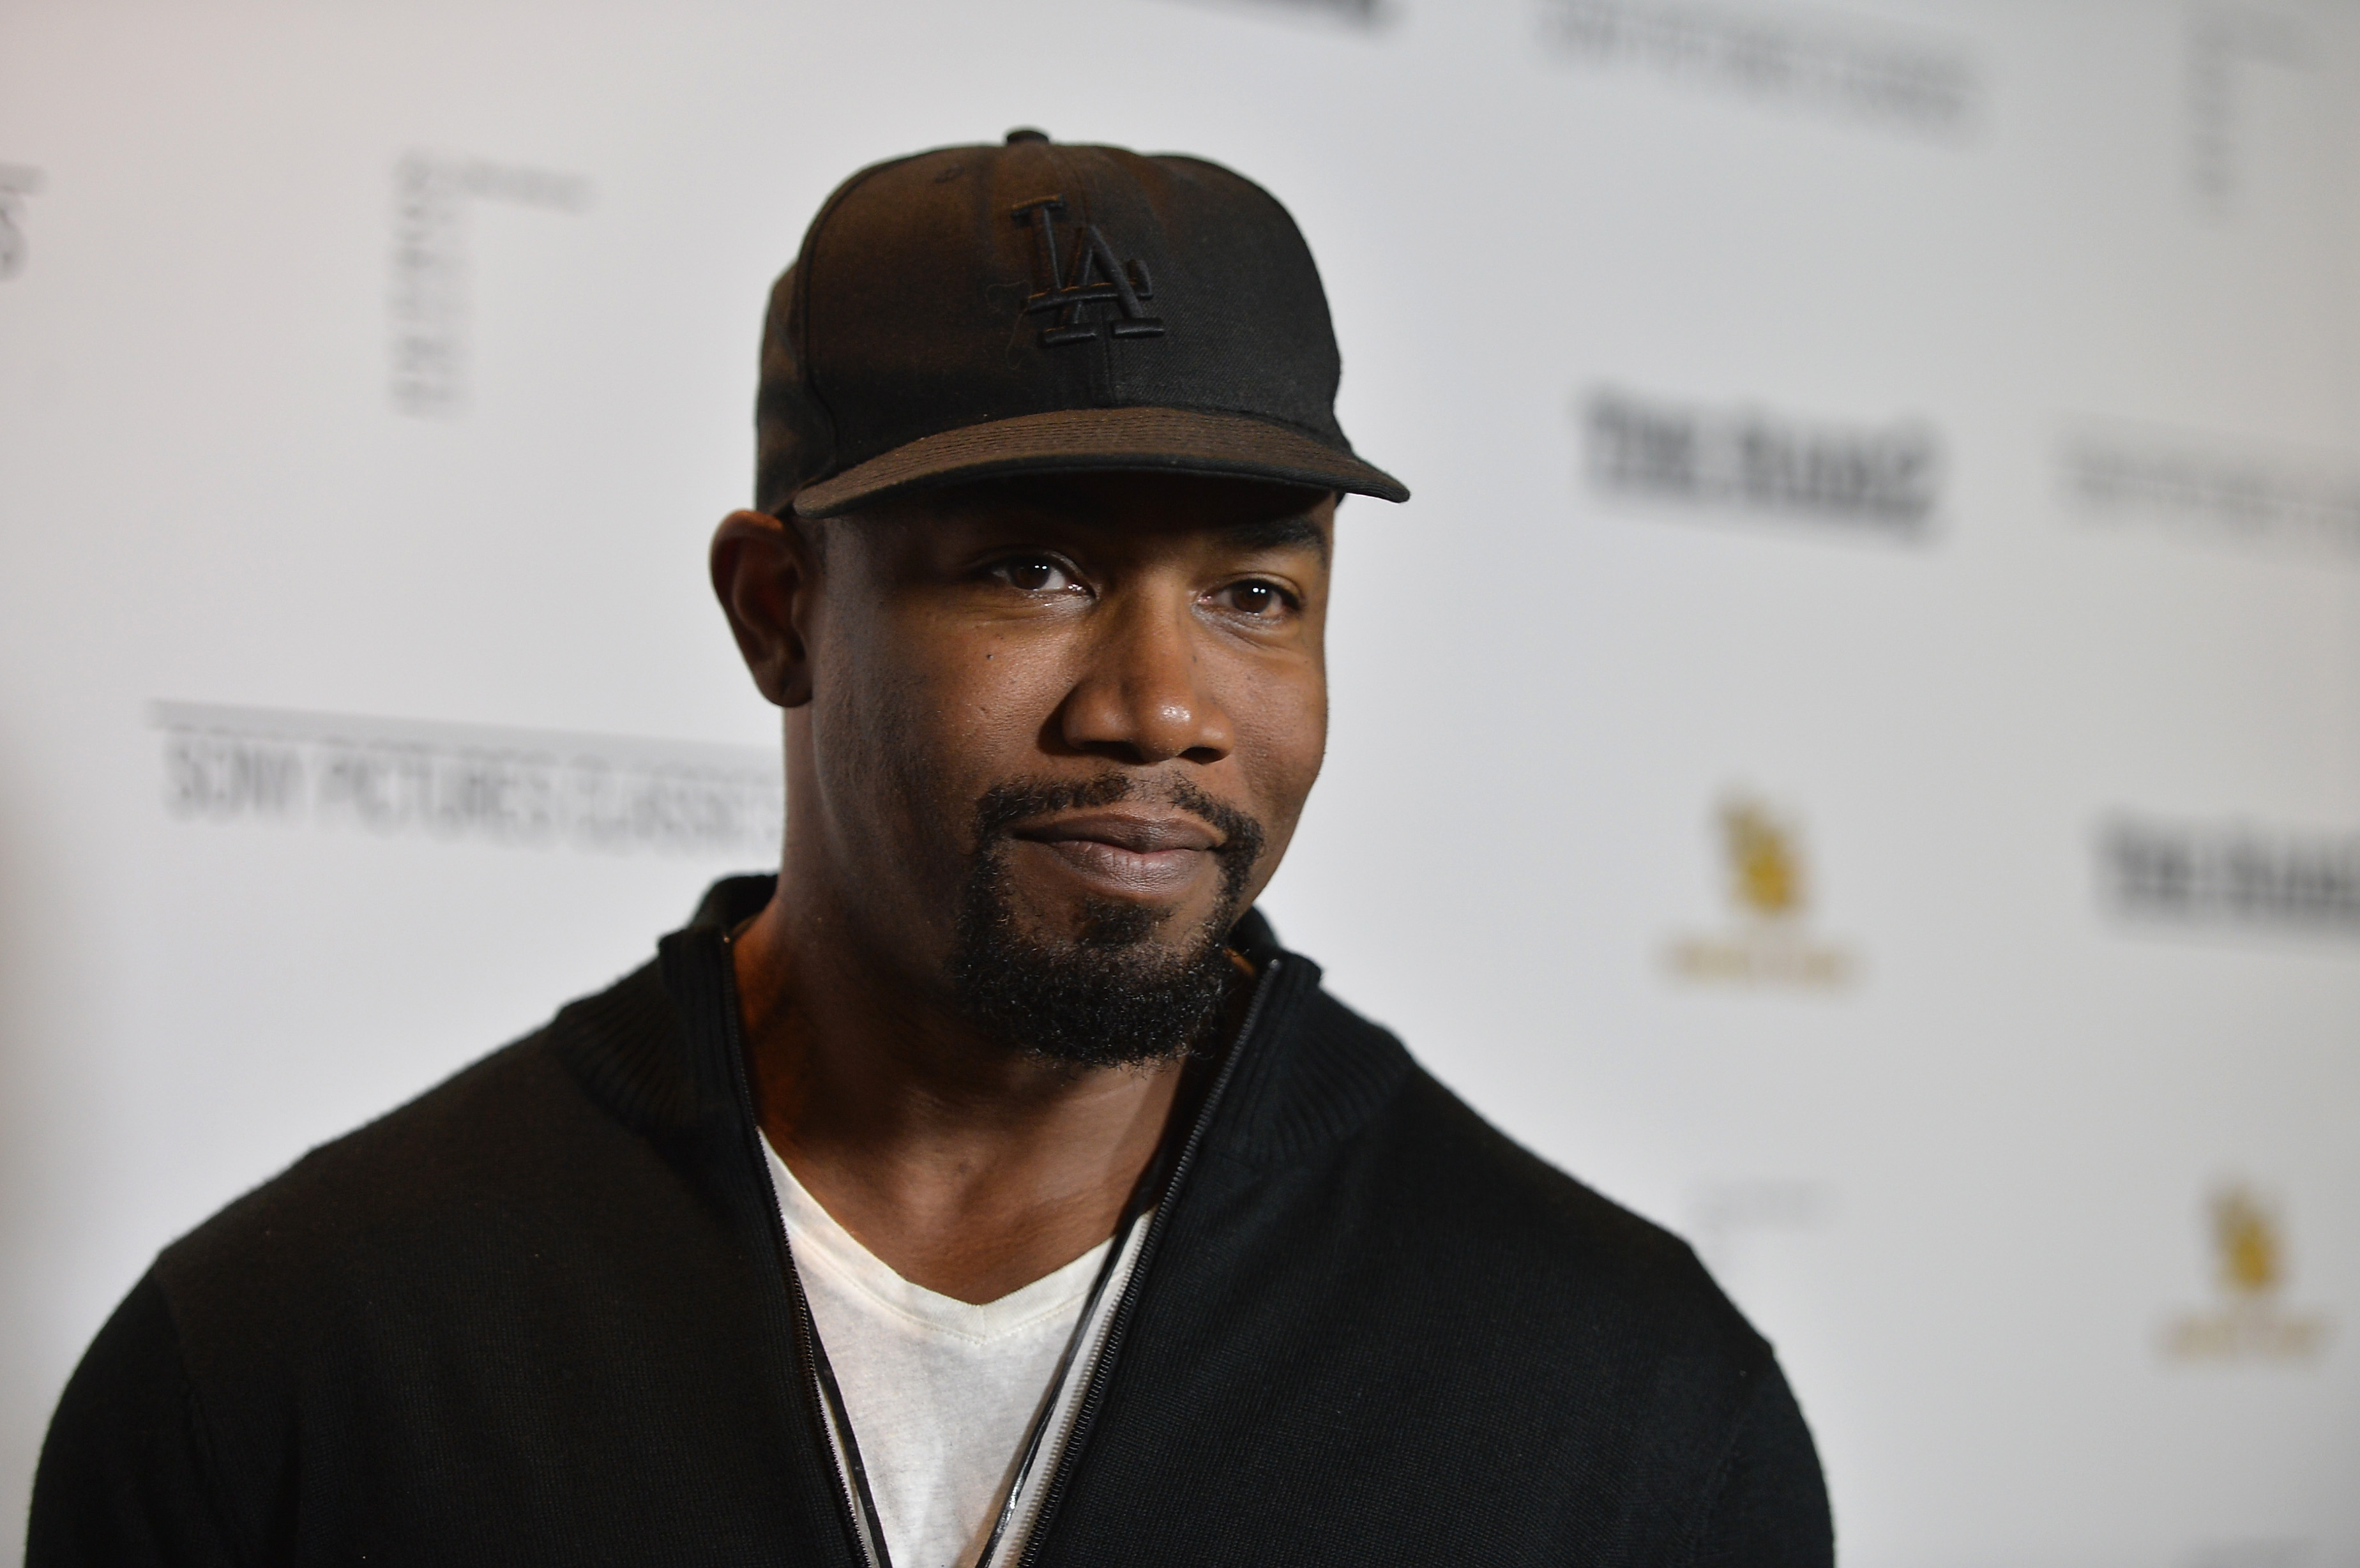 Michael Jai White Discusses His Son Dying From COVID-19 Months Ago